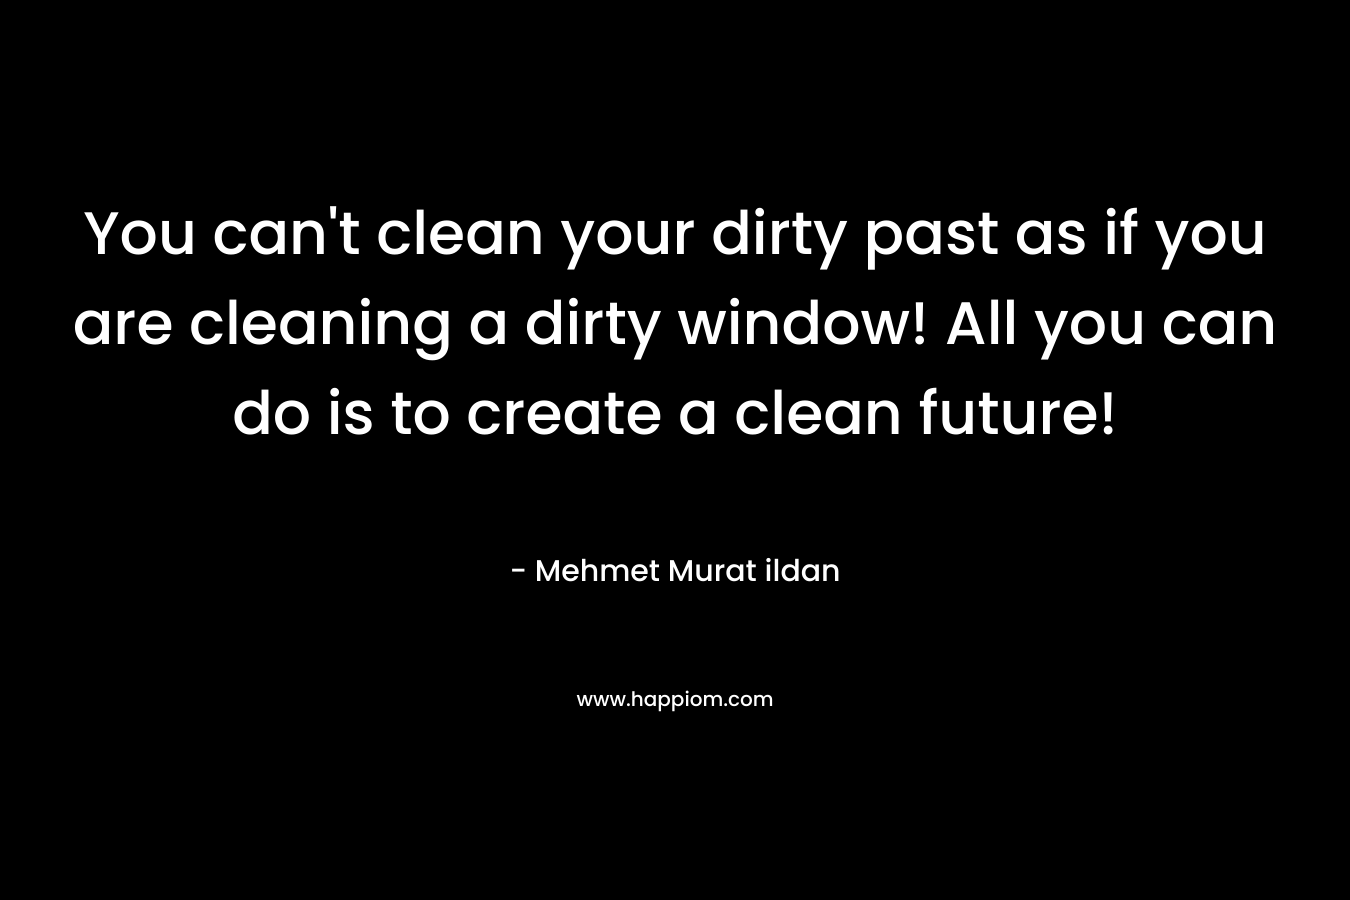 You can’t clean your dirty past as if you are cleaning a dirty window! All you can do is to create a clean future! – Mehmet Murat ildan